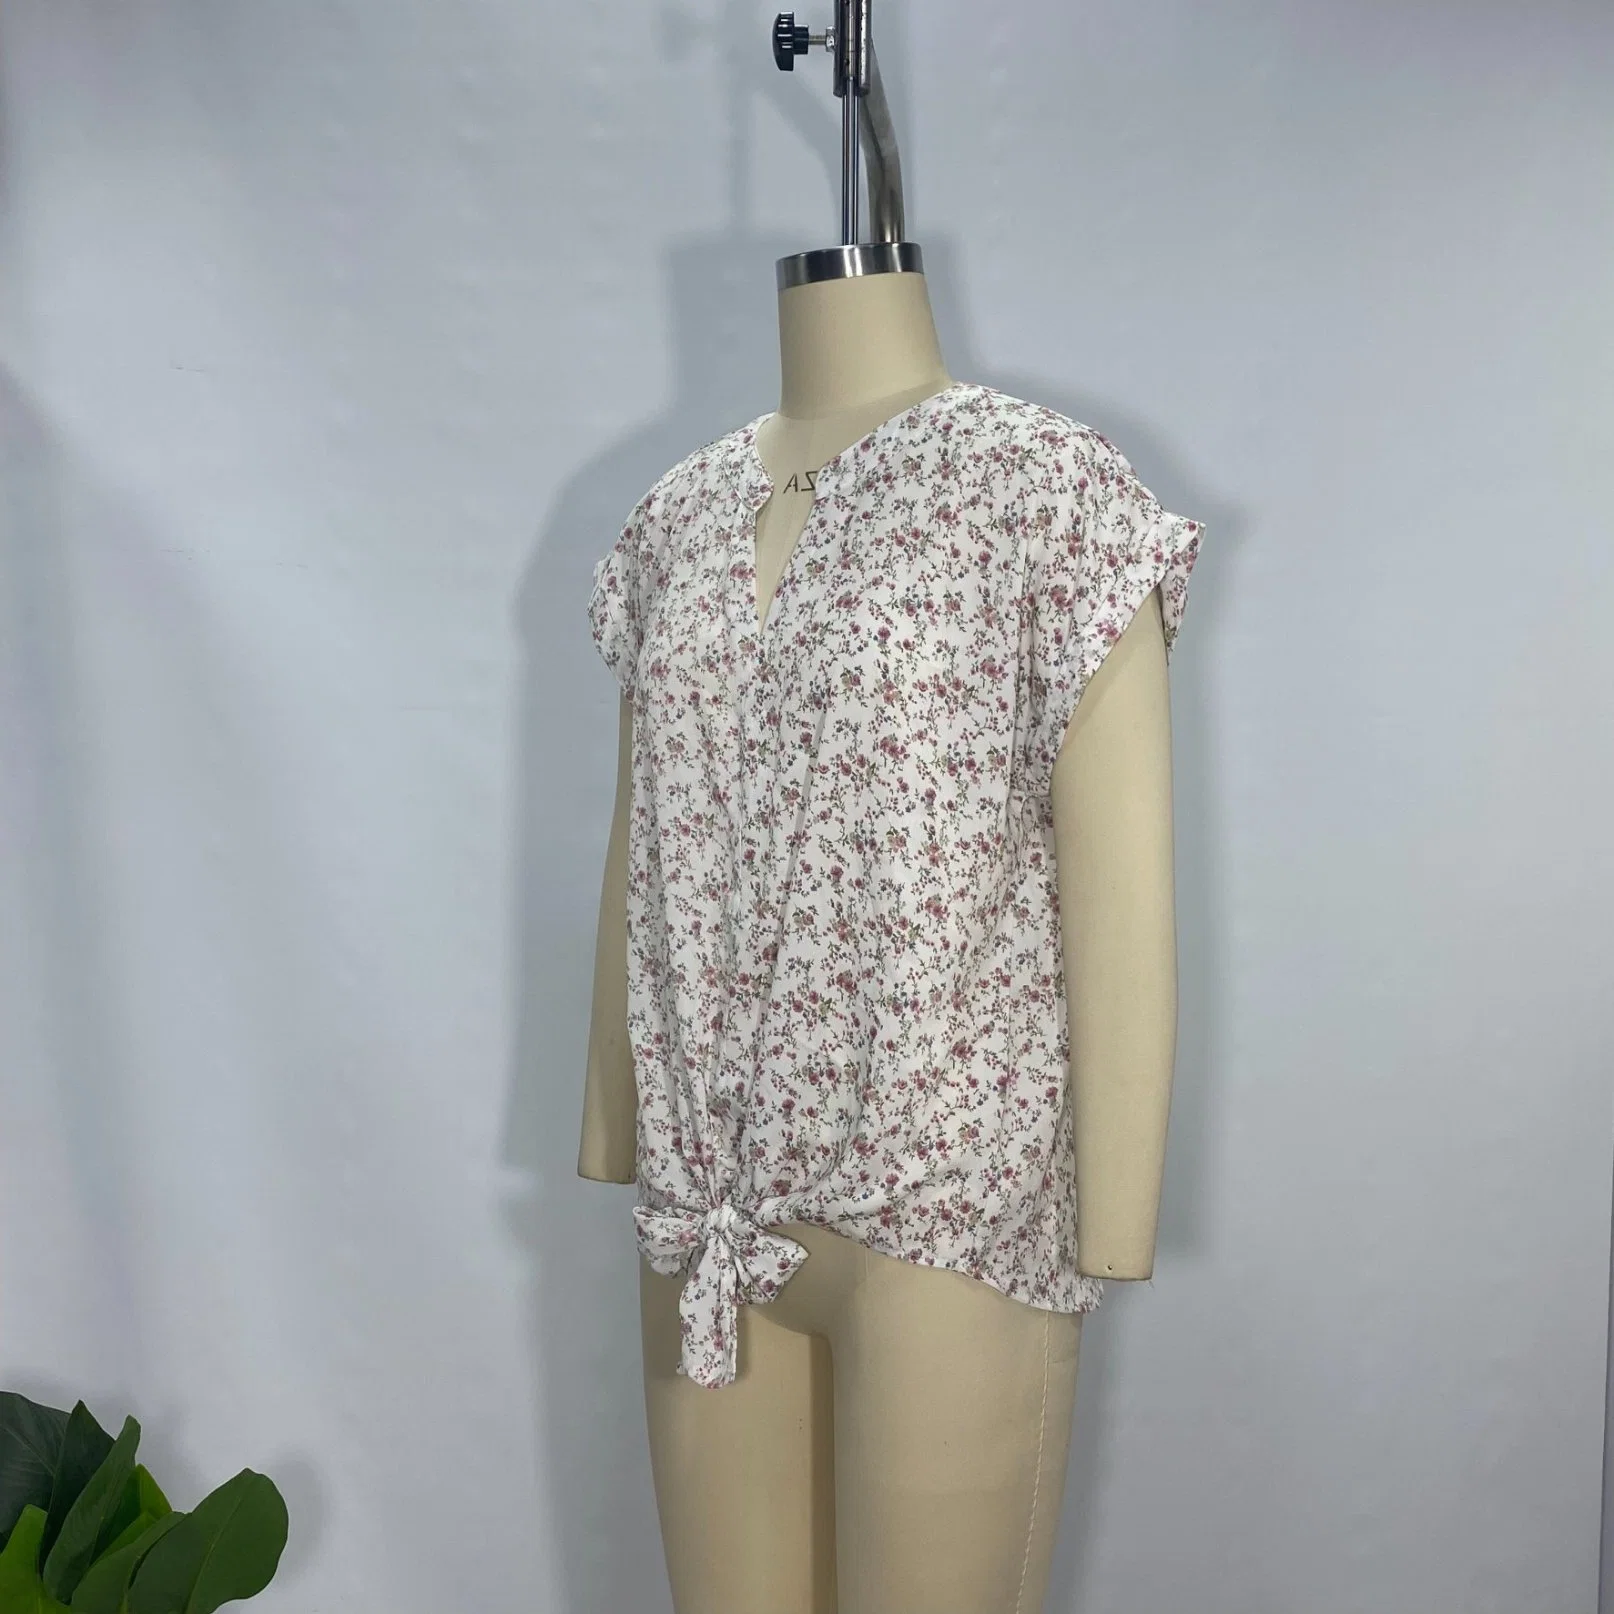 Sommer Casual Fashion Floral Bedrucktes Weißes Lady Tie Wickeltop